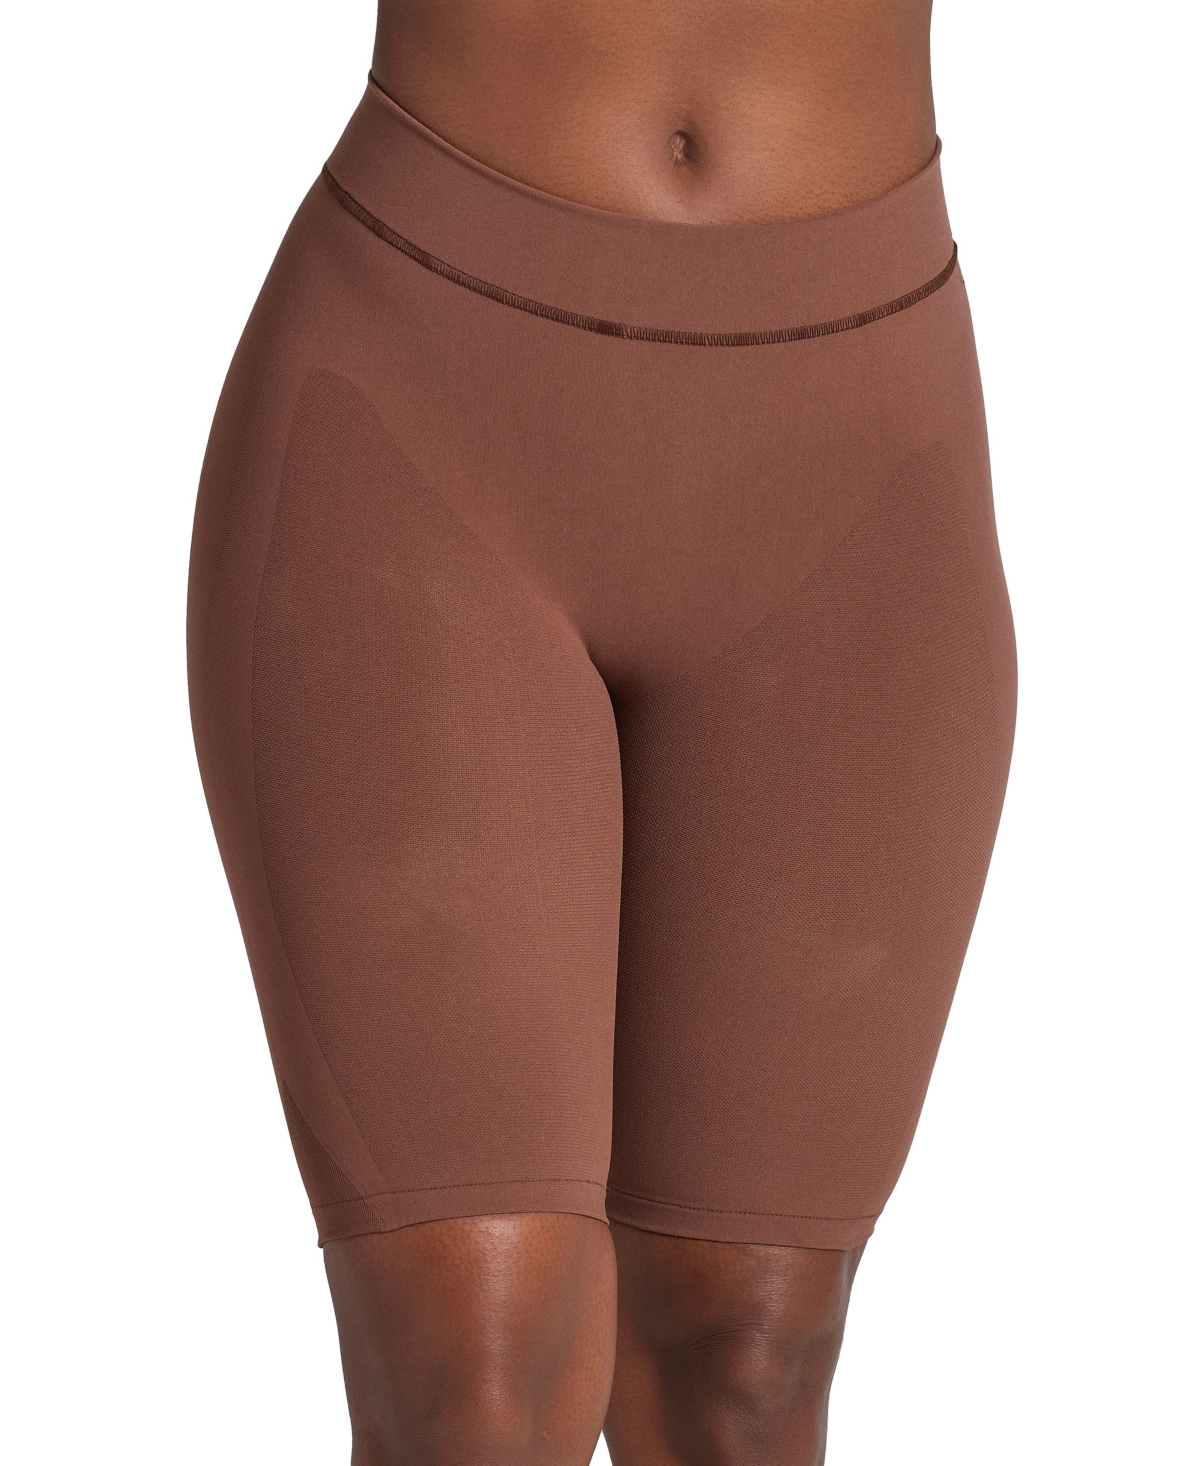 Well-Rounded Invisible Butt Lifter Shaper Short - Dark Brown